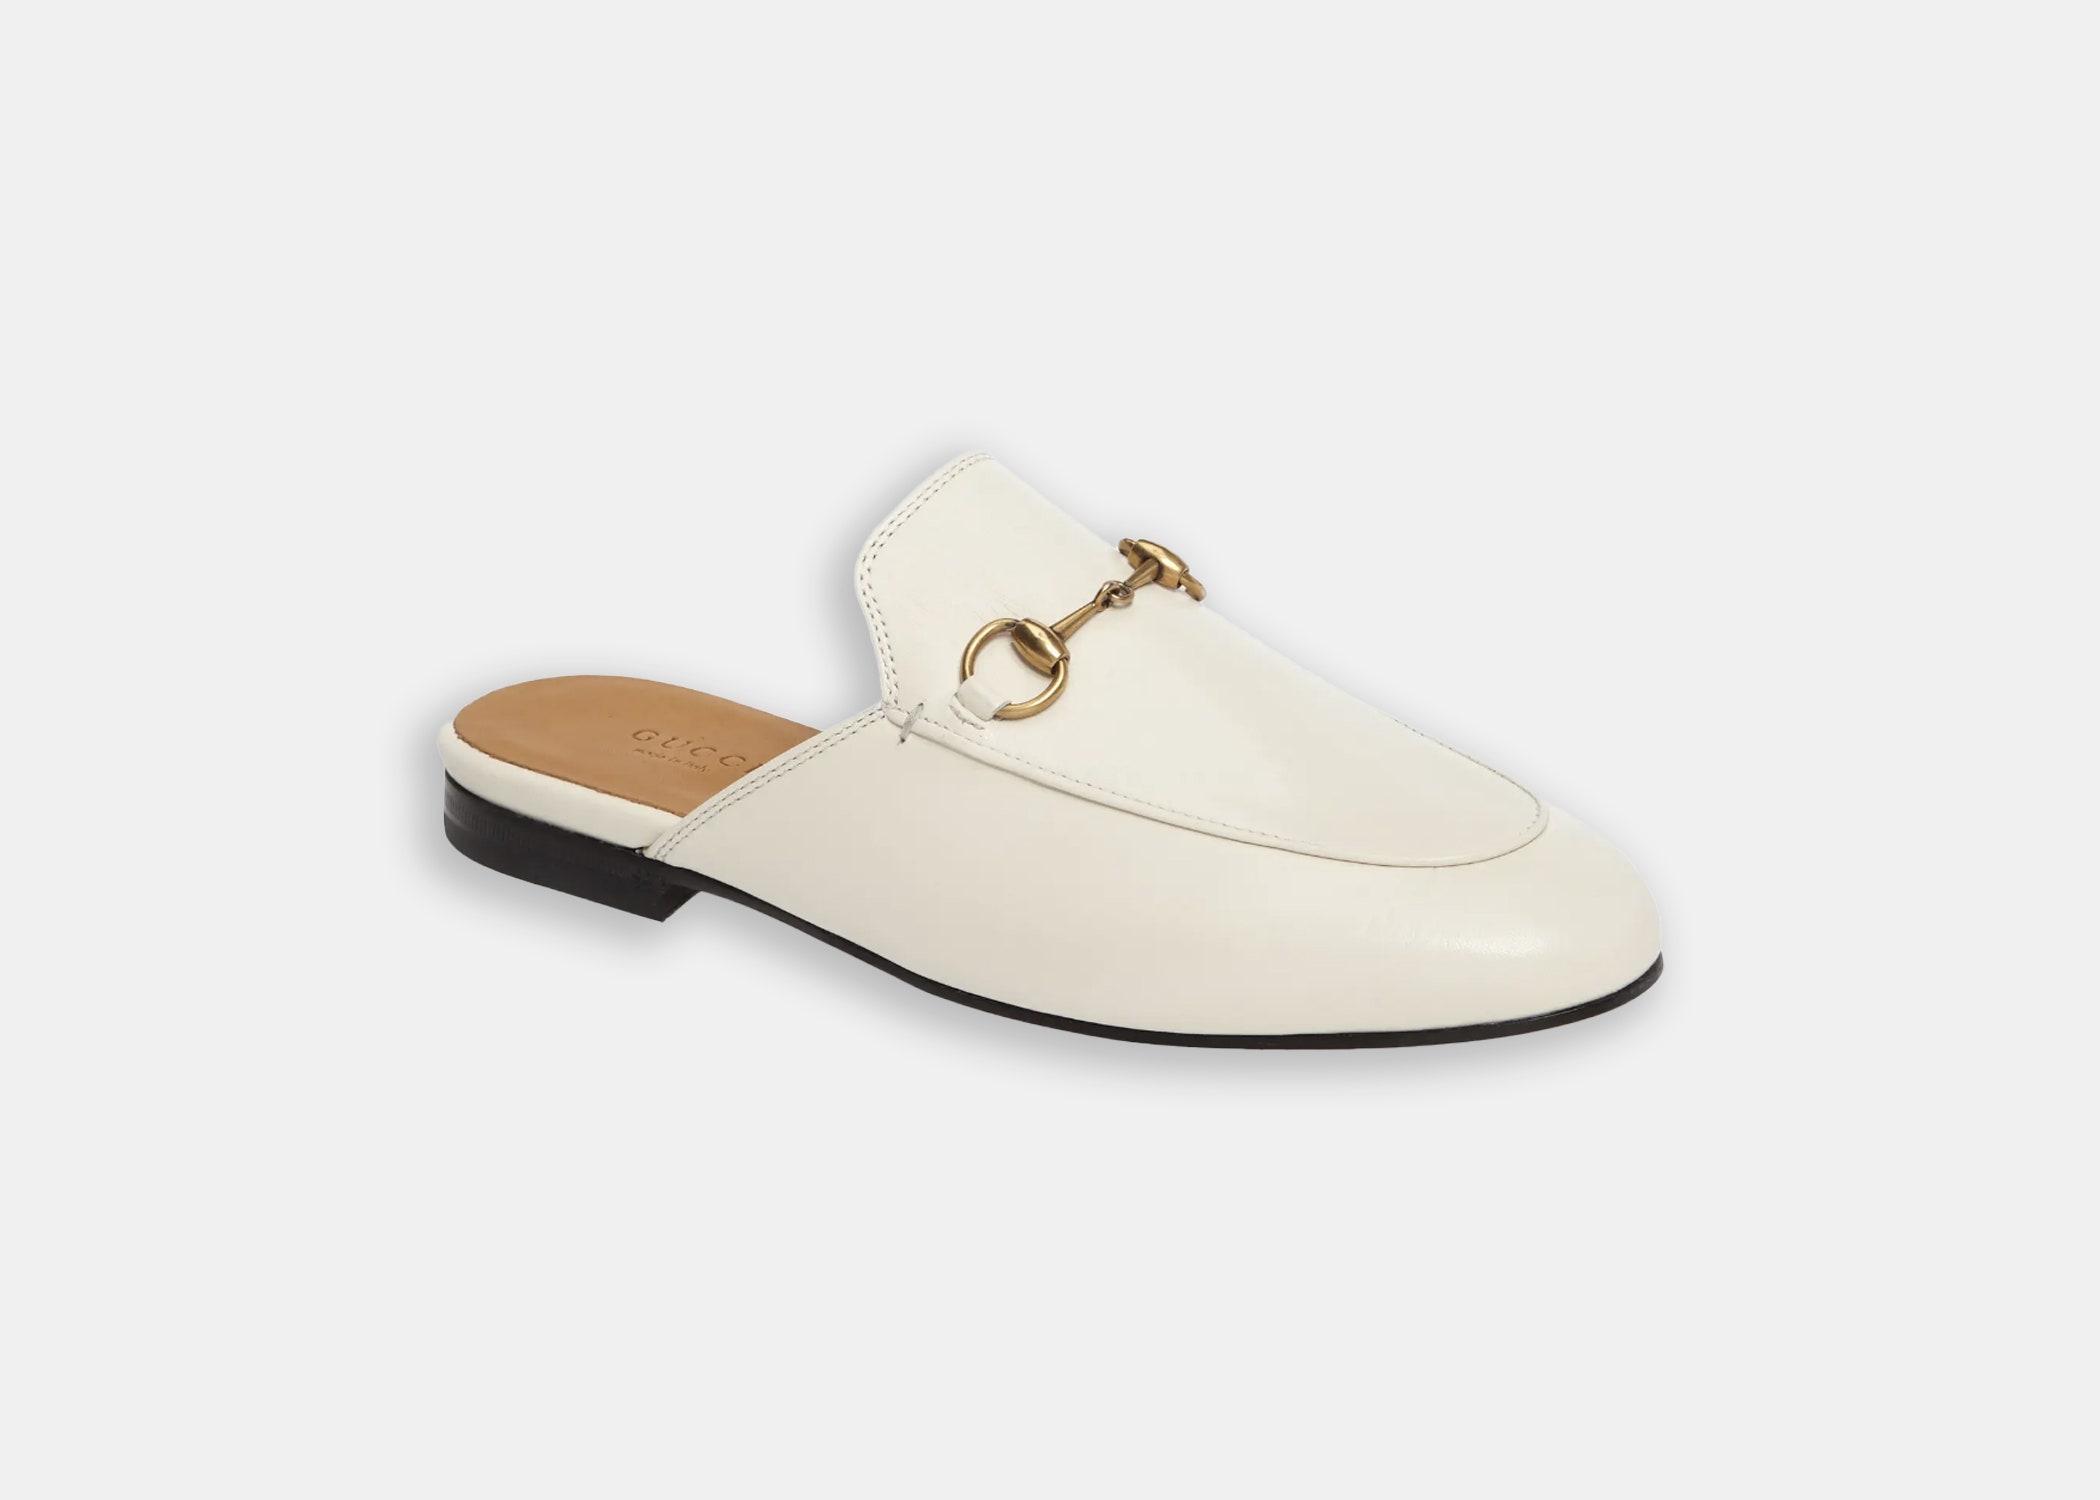 You can't get more timeless than a Gucci mule. Available in six colors (red, sand, and cream among them) and made from butter-soft Italian leather with the gold horsebit detailing the brand is known for, it's the ultimate plane-to-meeting-to-dinner shoe. (Which also helps if you're trying to pack light.) They do, however, run small, so make sure to order your pair half a size up. $850, Nordstrom. <a href="https://www.nordstrom.com/s/gucci-princetown-loafer-mule-women/4262998">Get it now!</a>